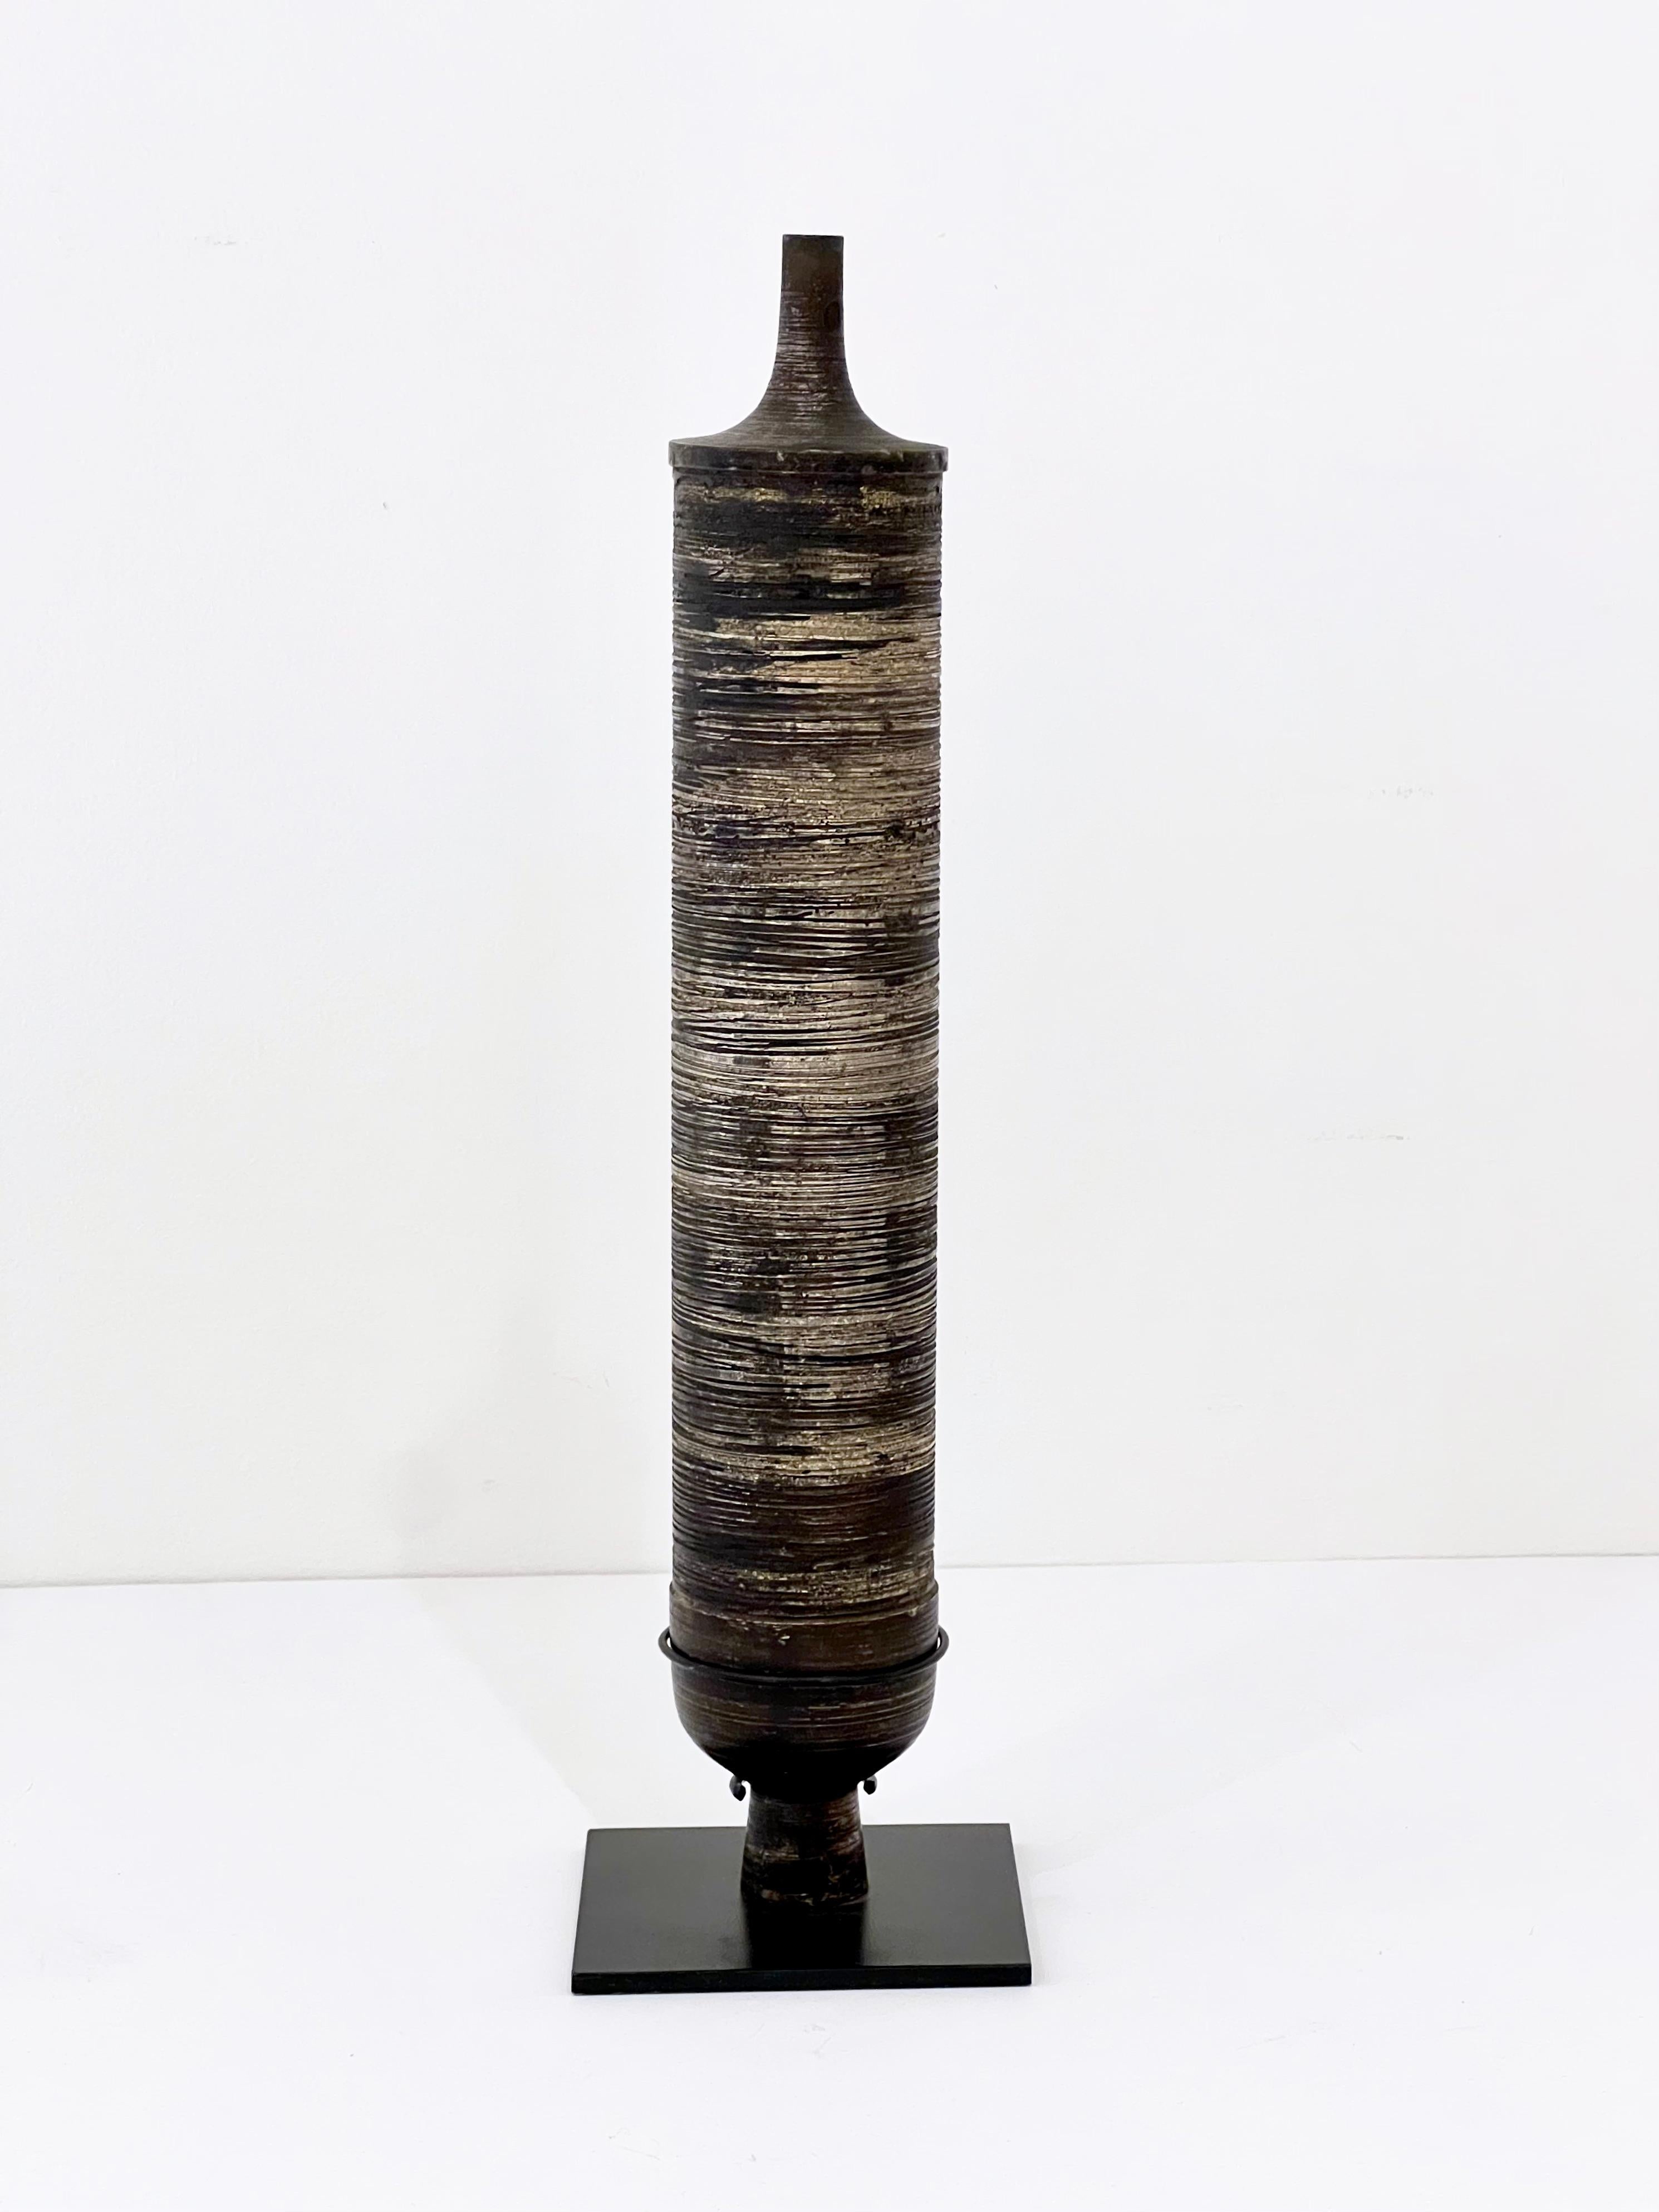 Striking hand-spun patinated bronze vase sculpture on stand by Lorenzo Burchiellaro, with great linear texture.  Italy 1955.